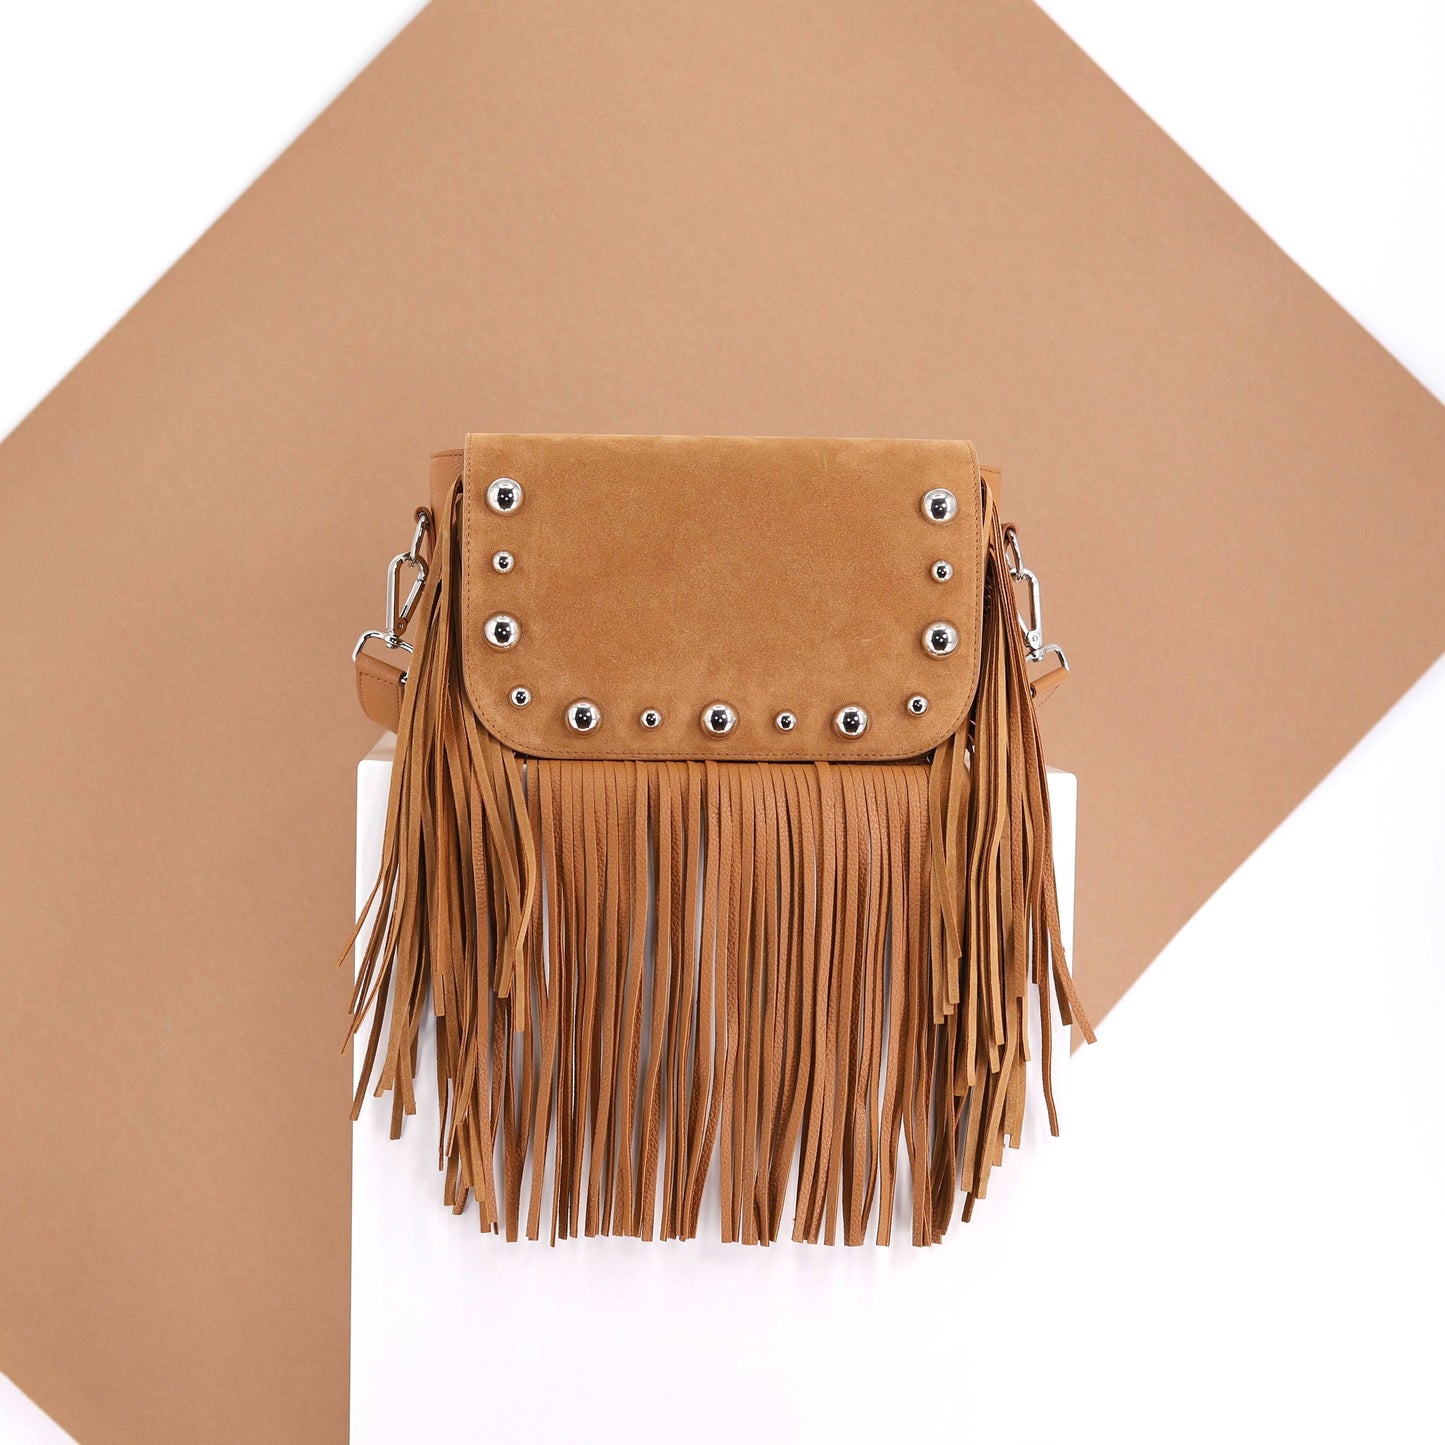 BRONX flap suede leather silver studs caramel small